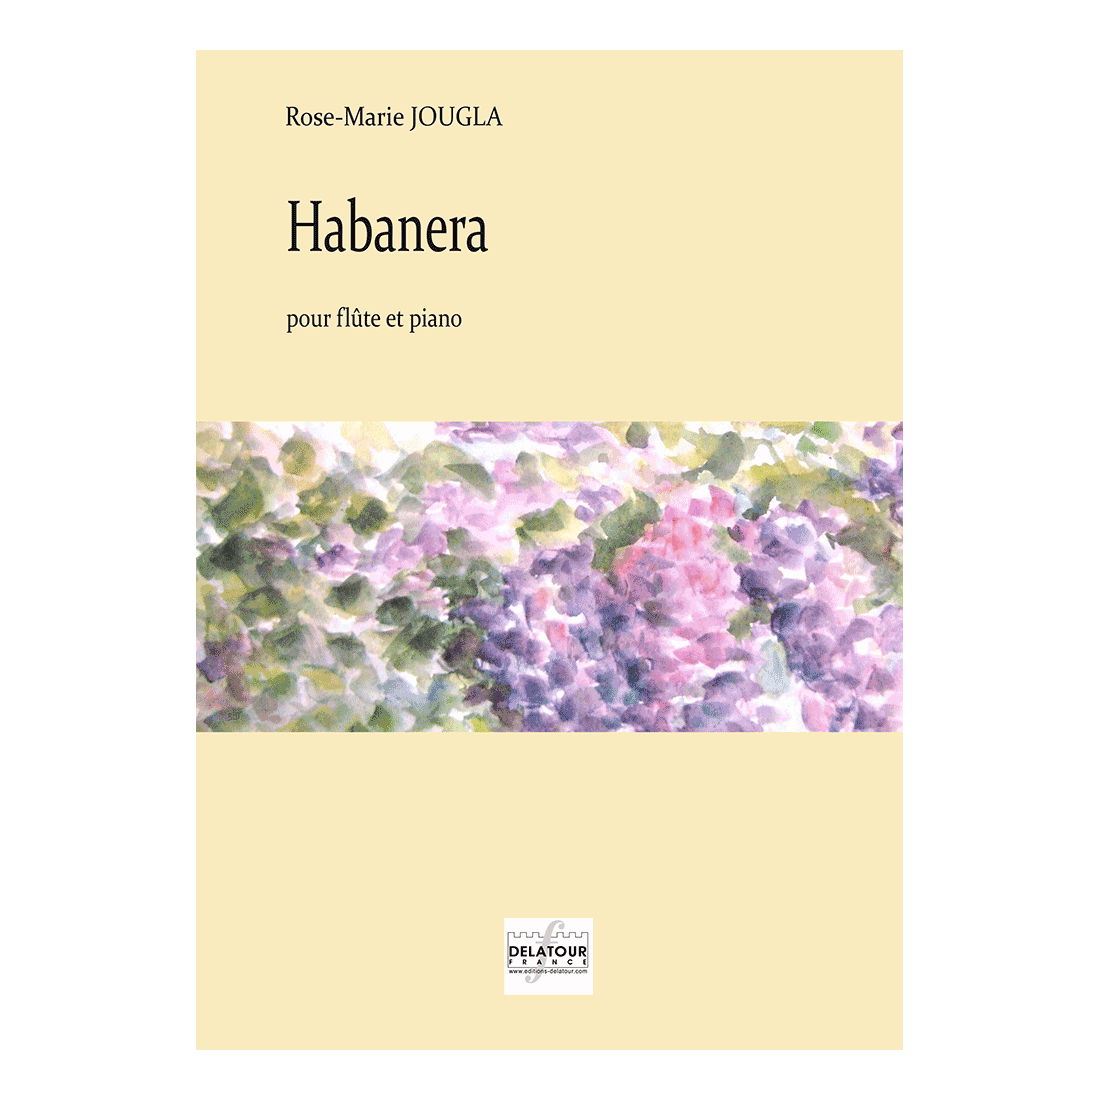 Habanera for flute and piano